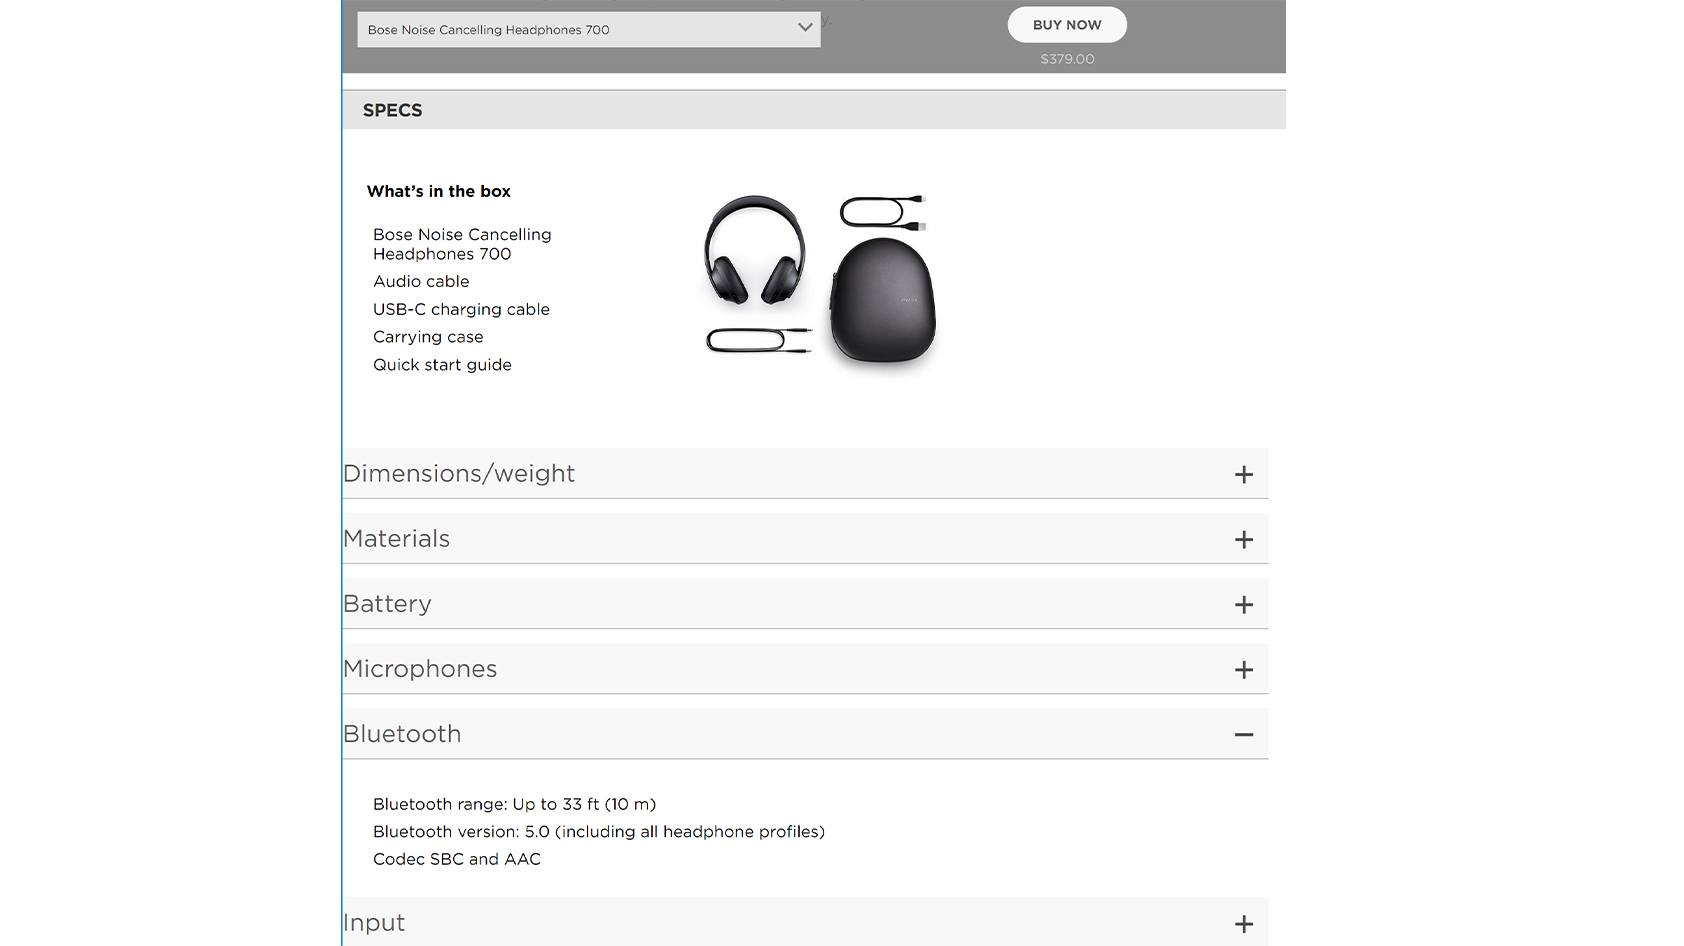 A screenshot of the Bose Noise Canceling 700 headphones specs page with the Bluetooth drop-down menu opened. The text reads: Specs. What’s in the box. Bose Noise Canceling Headphones 700. Audio cable. USB-C charging cable. Carrying case. Quick start guide. Bluetooth. Bluetooth range: Up to 33 ft (10 m). Bluetooth version: 5.0 (including all headphone profiles). Codec SBC and AAC.